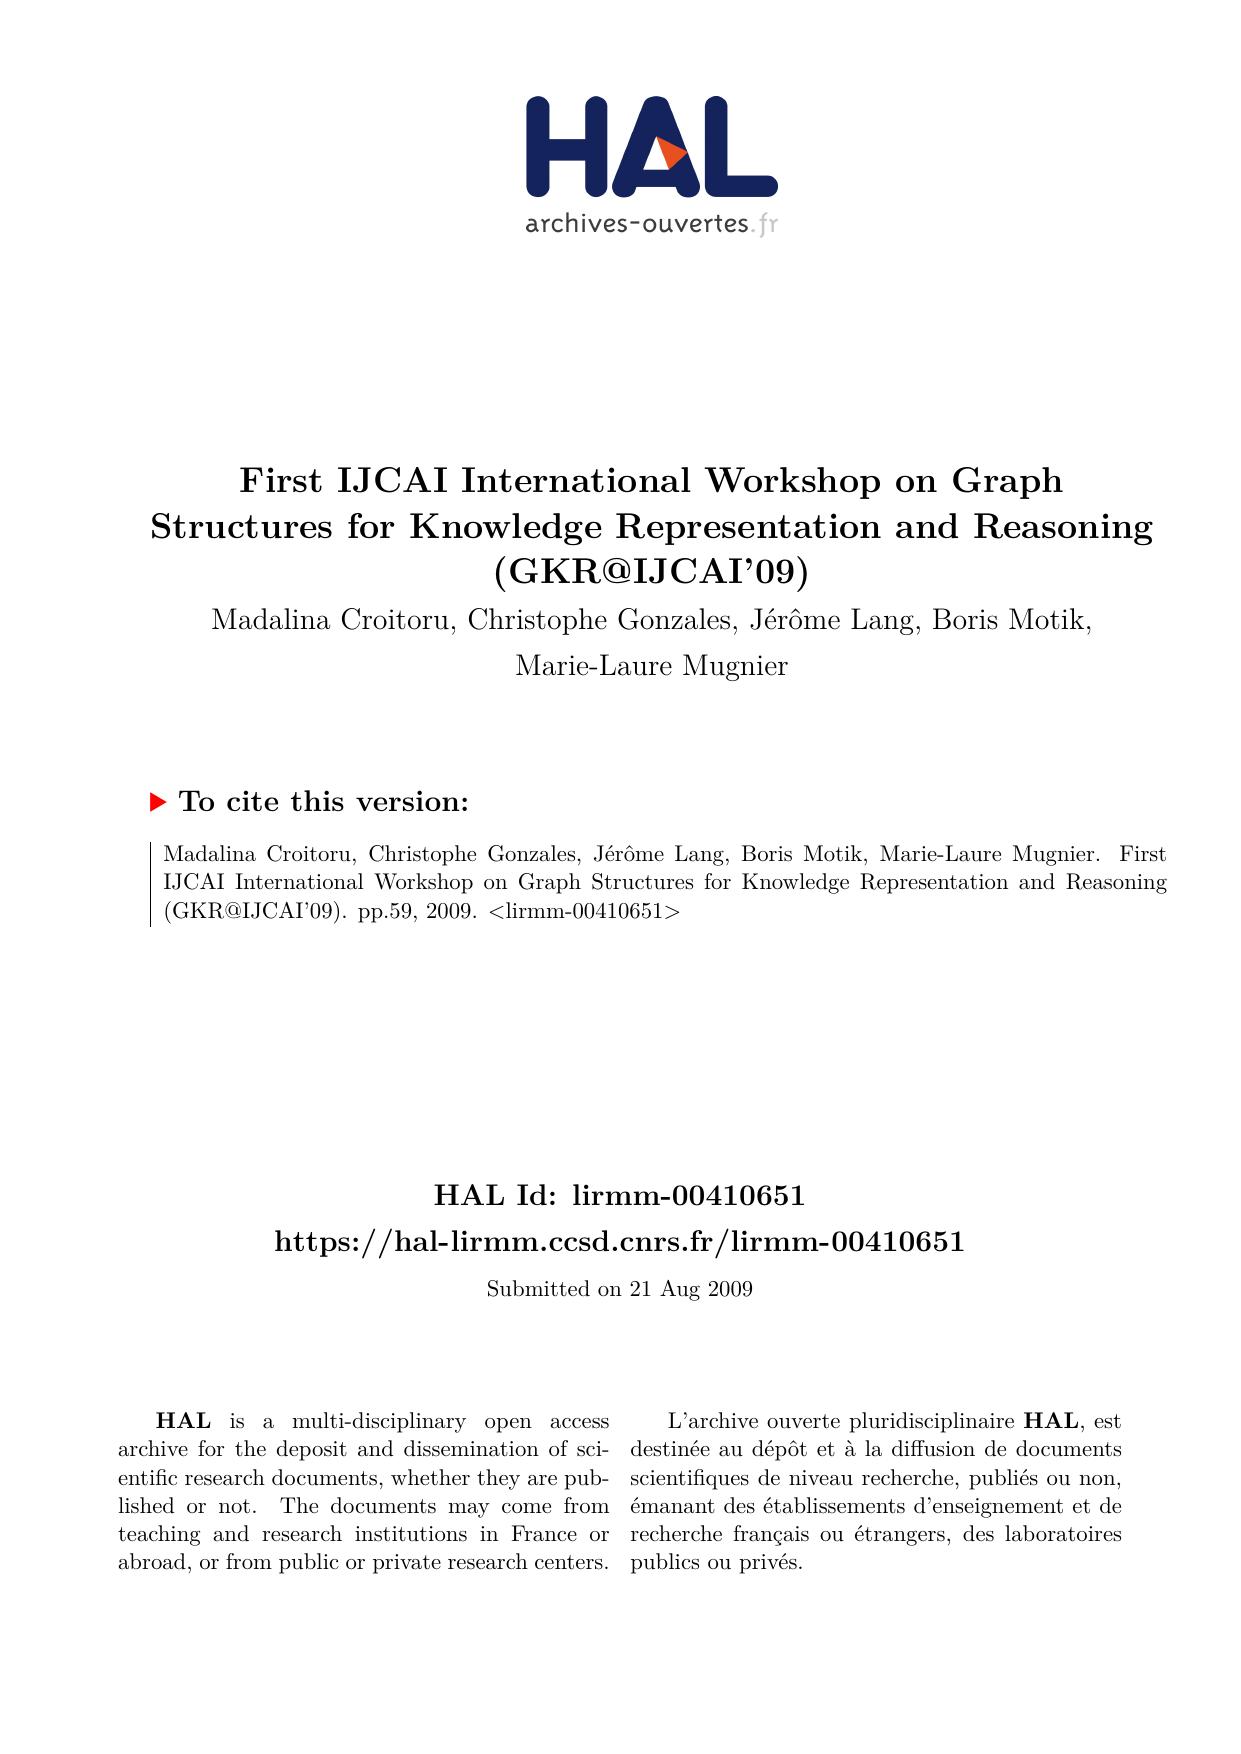 First IJCAI International Workshop on Graph Structures for Knowledge Representation and Reasoning (GKR@IJCAI'09)